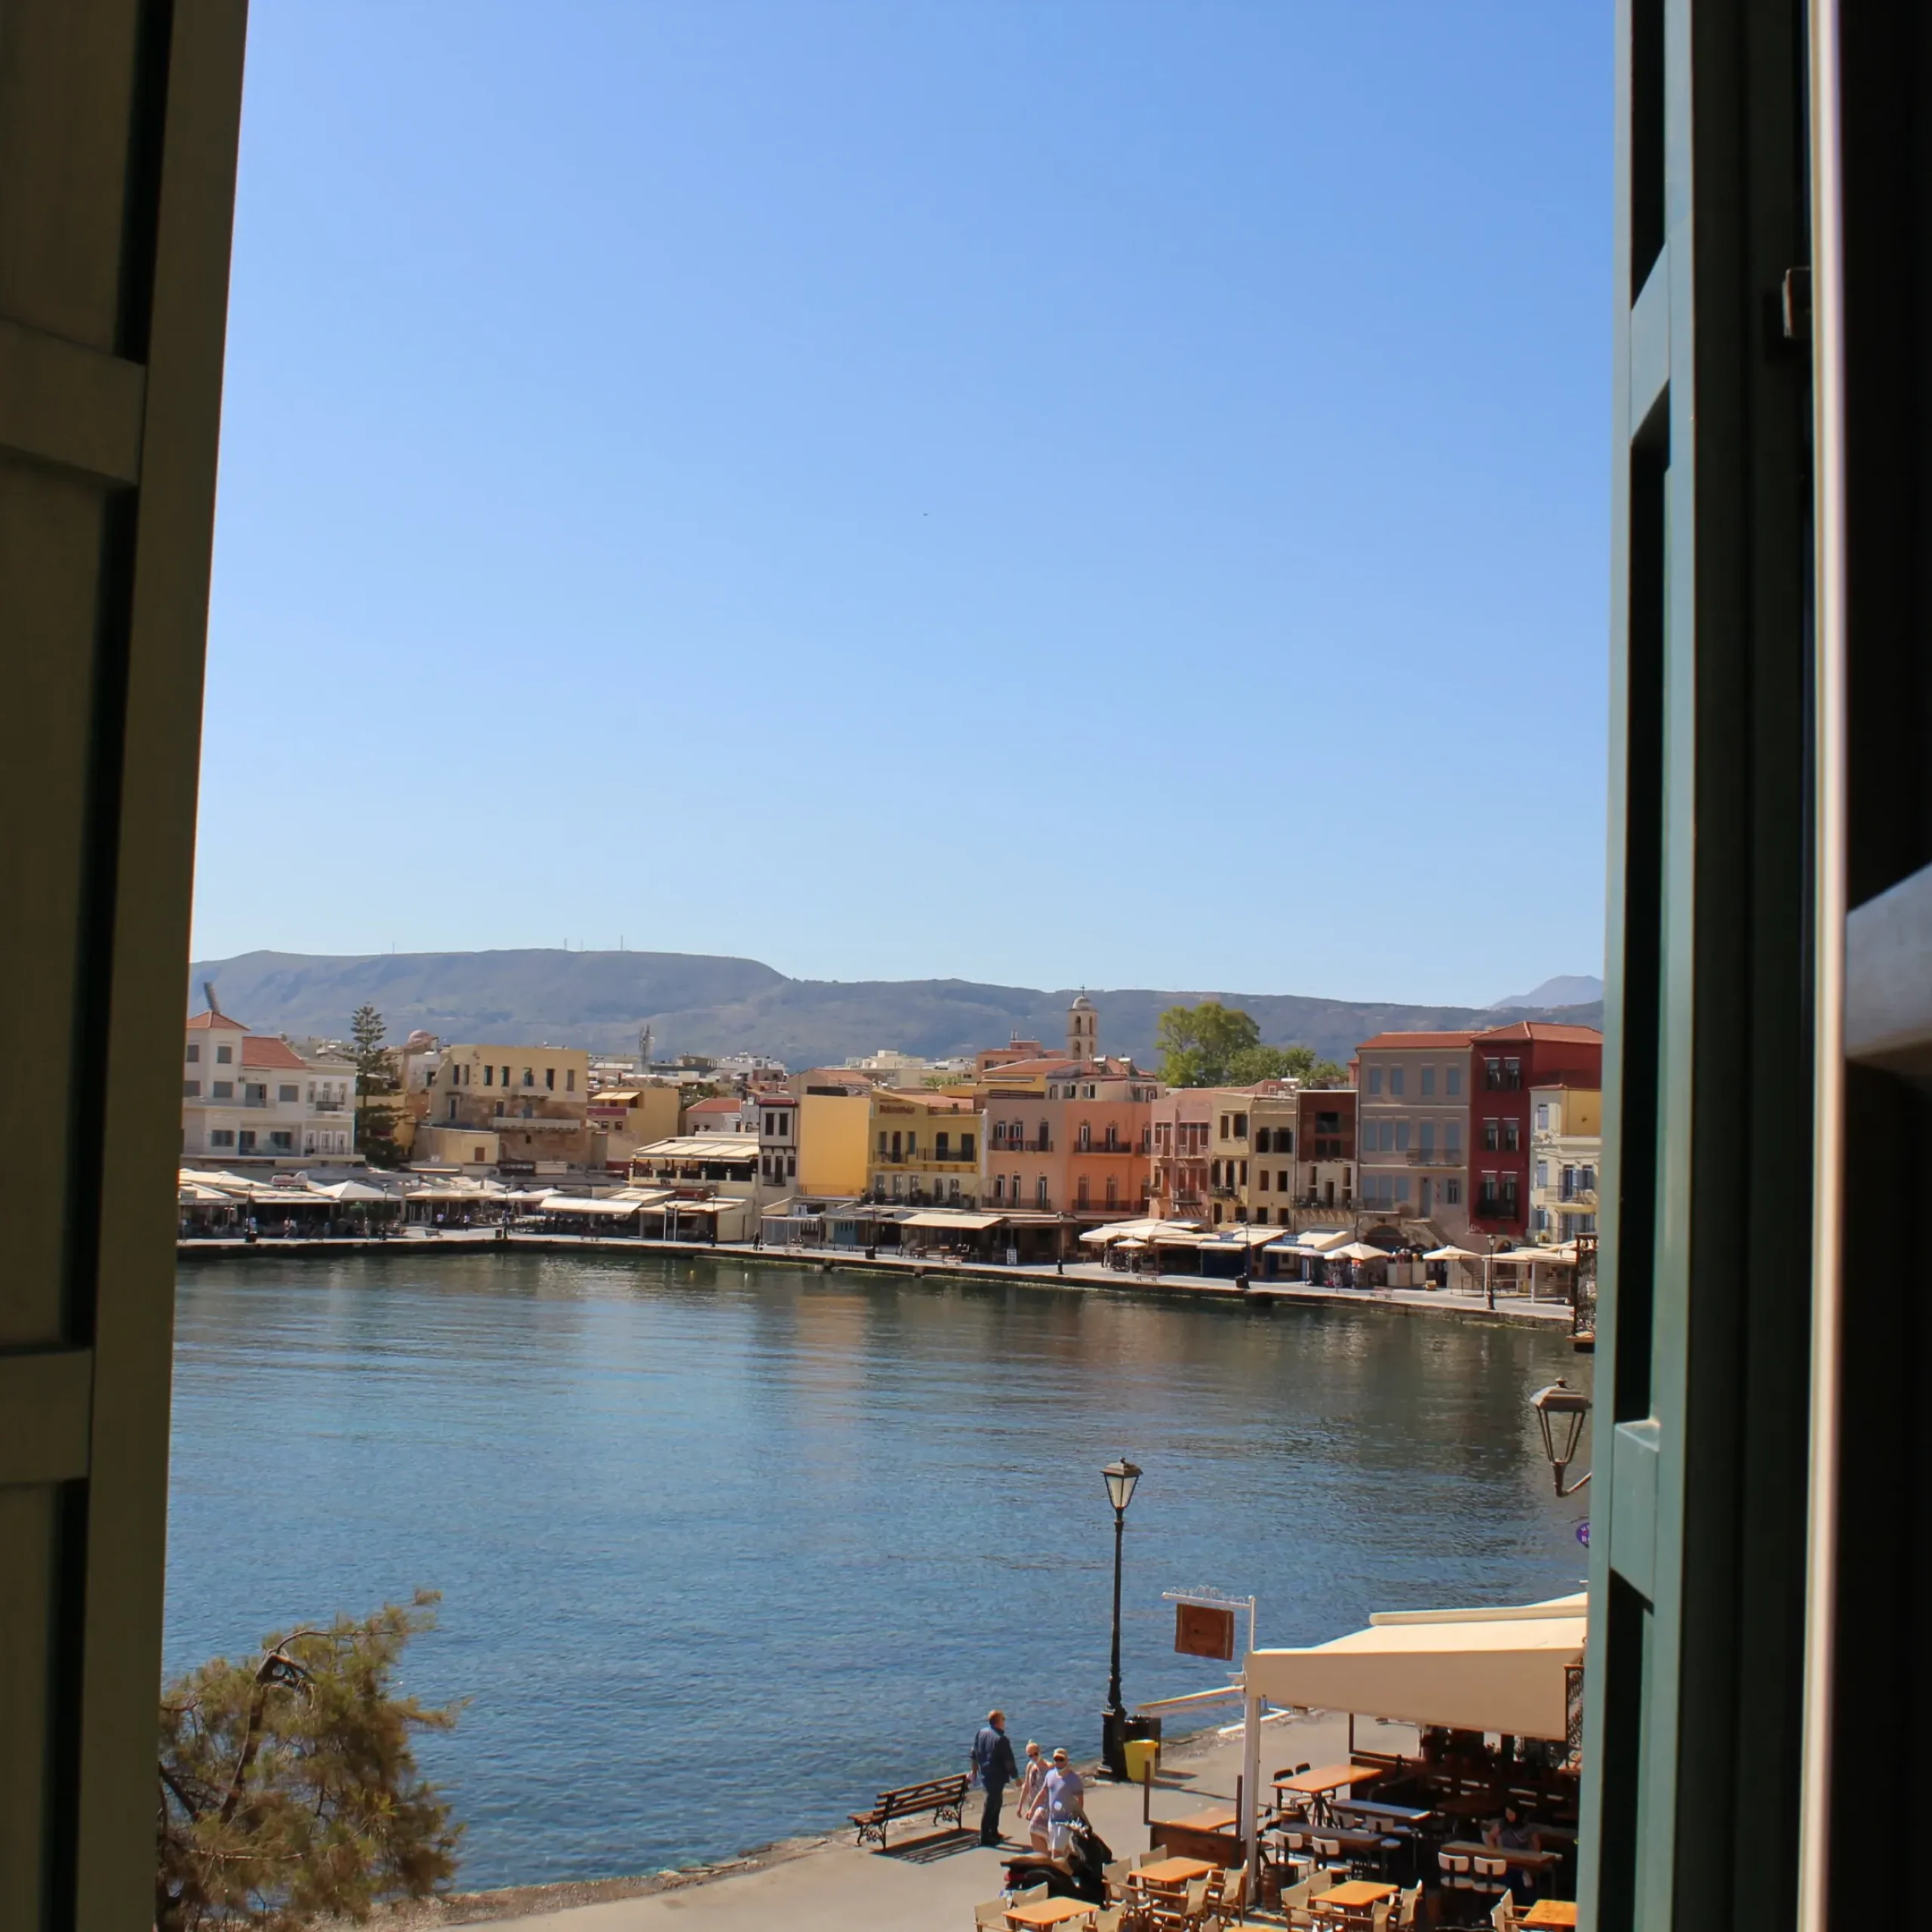 Chania Excursions in Old Port - Travel agency in Chania Crete